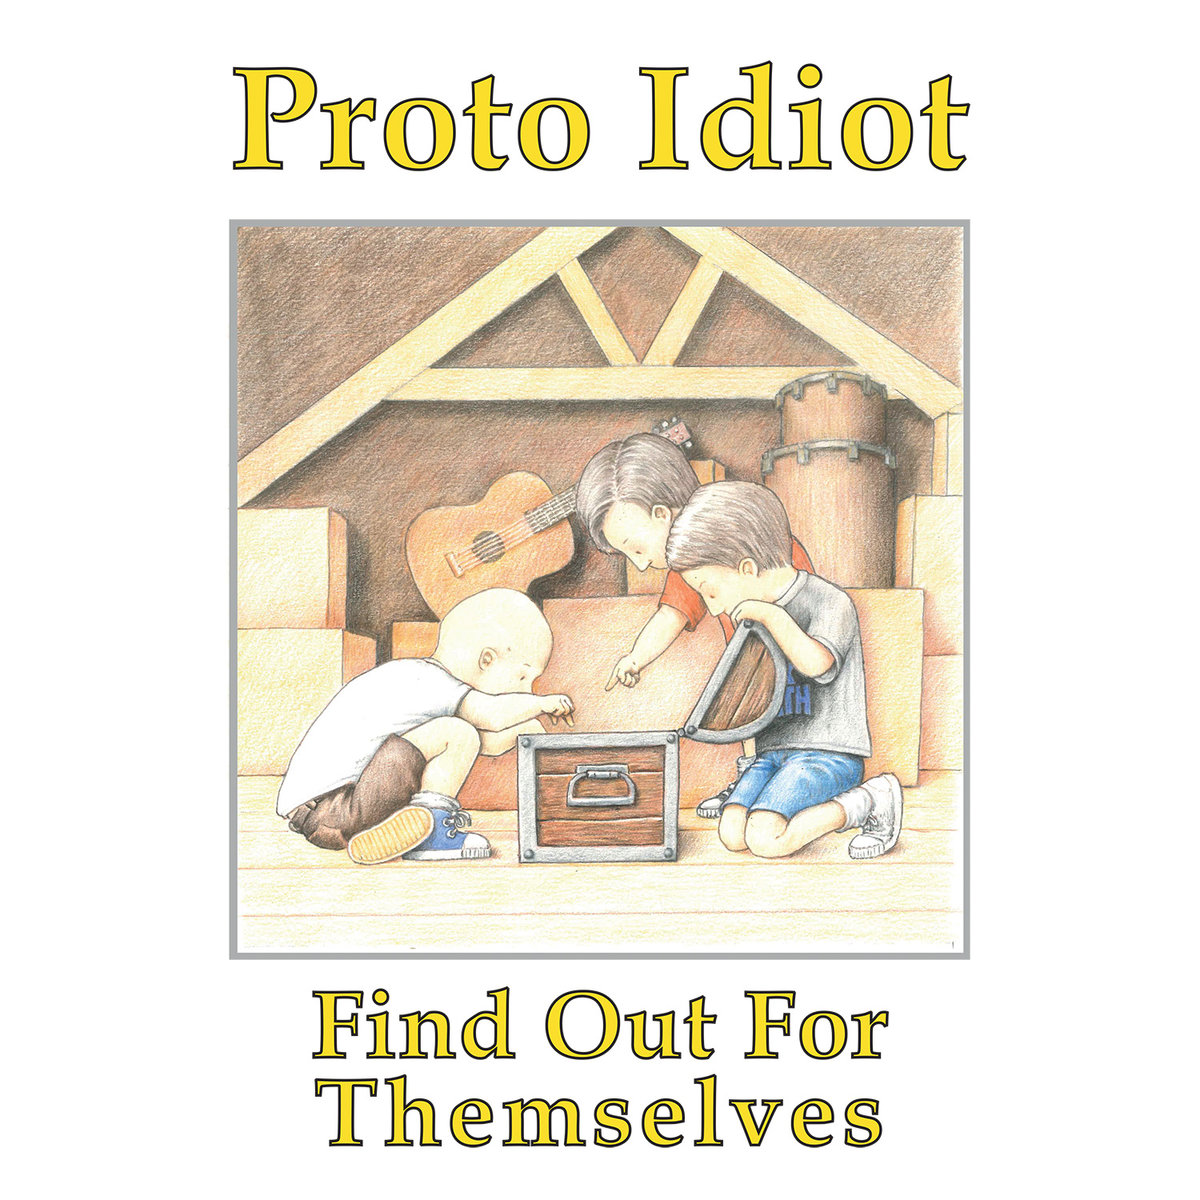 Proto Idiot "Find out for themselves" LP